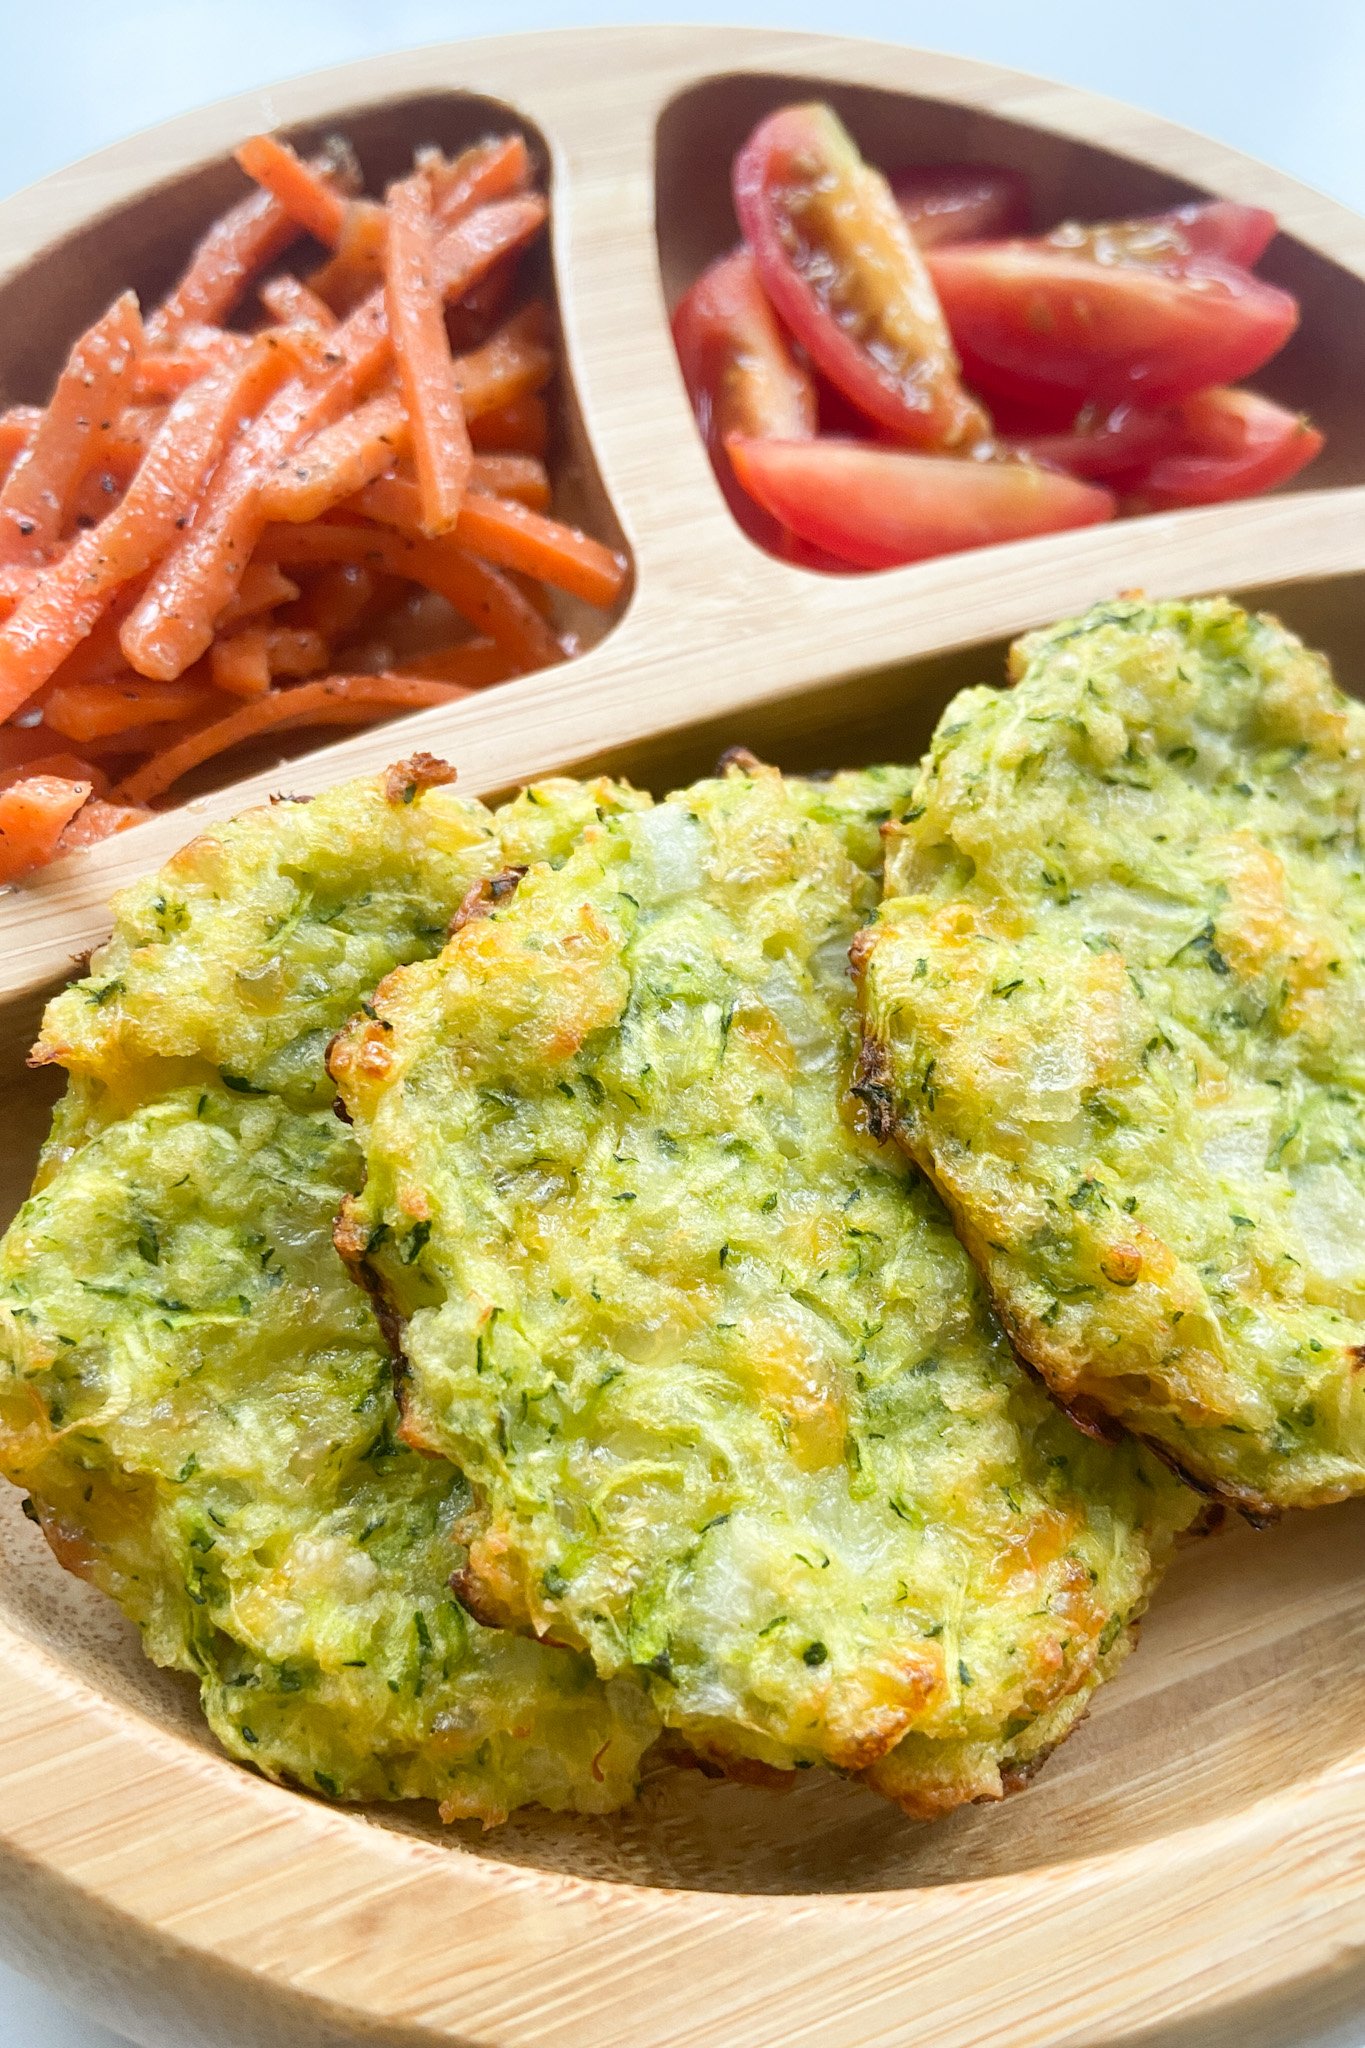 https://feedingtinybellies.com/wp-content/uploads/2021/12/Zucchini-fritters-served-with-carrots-and-tomatoes.jpg